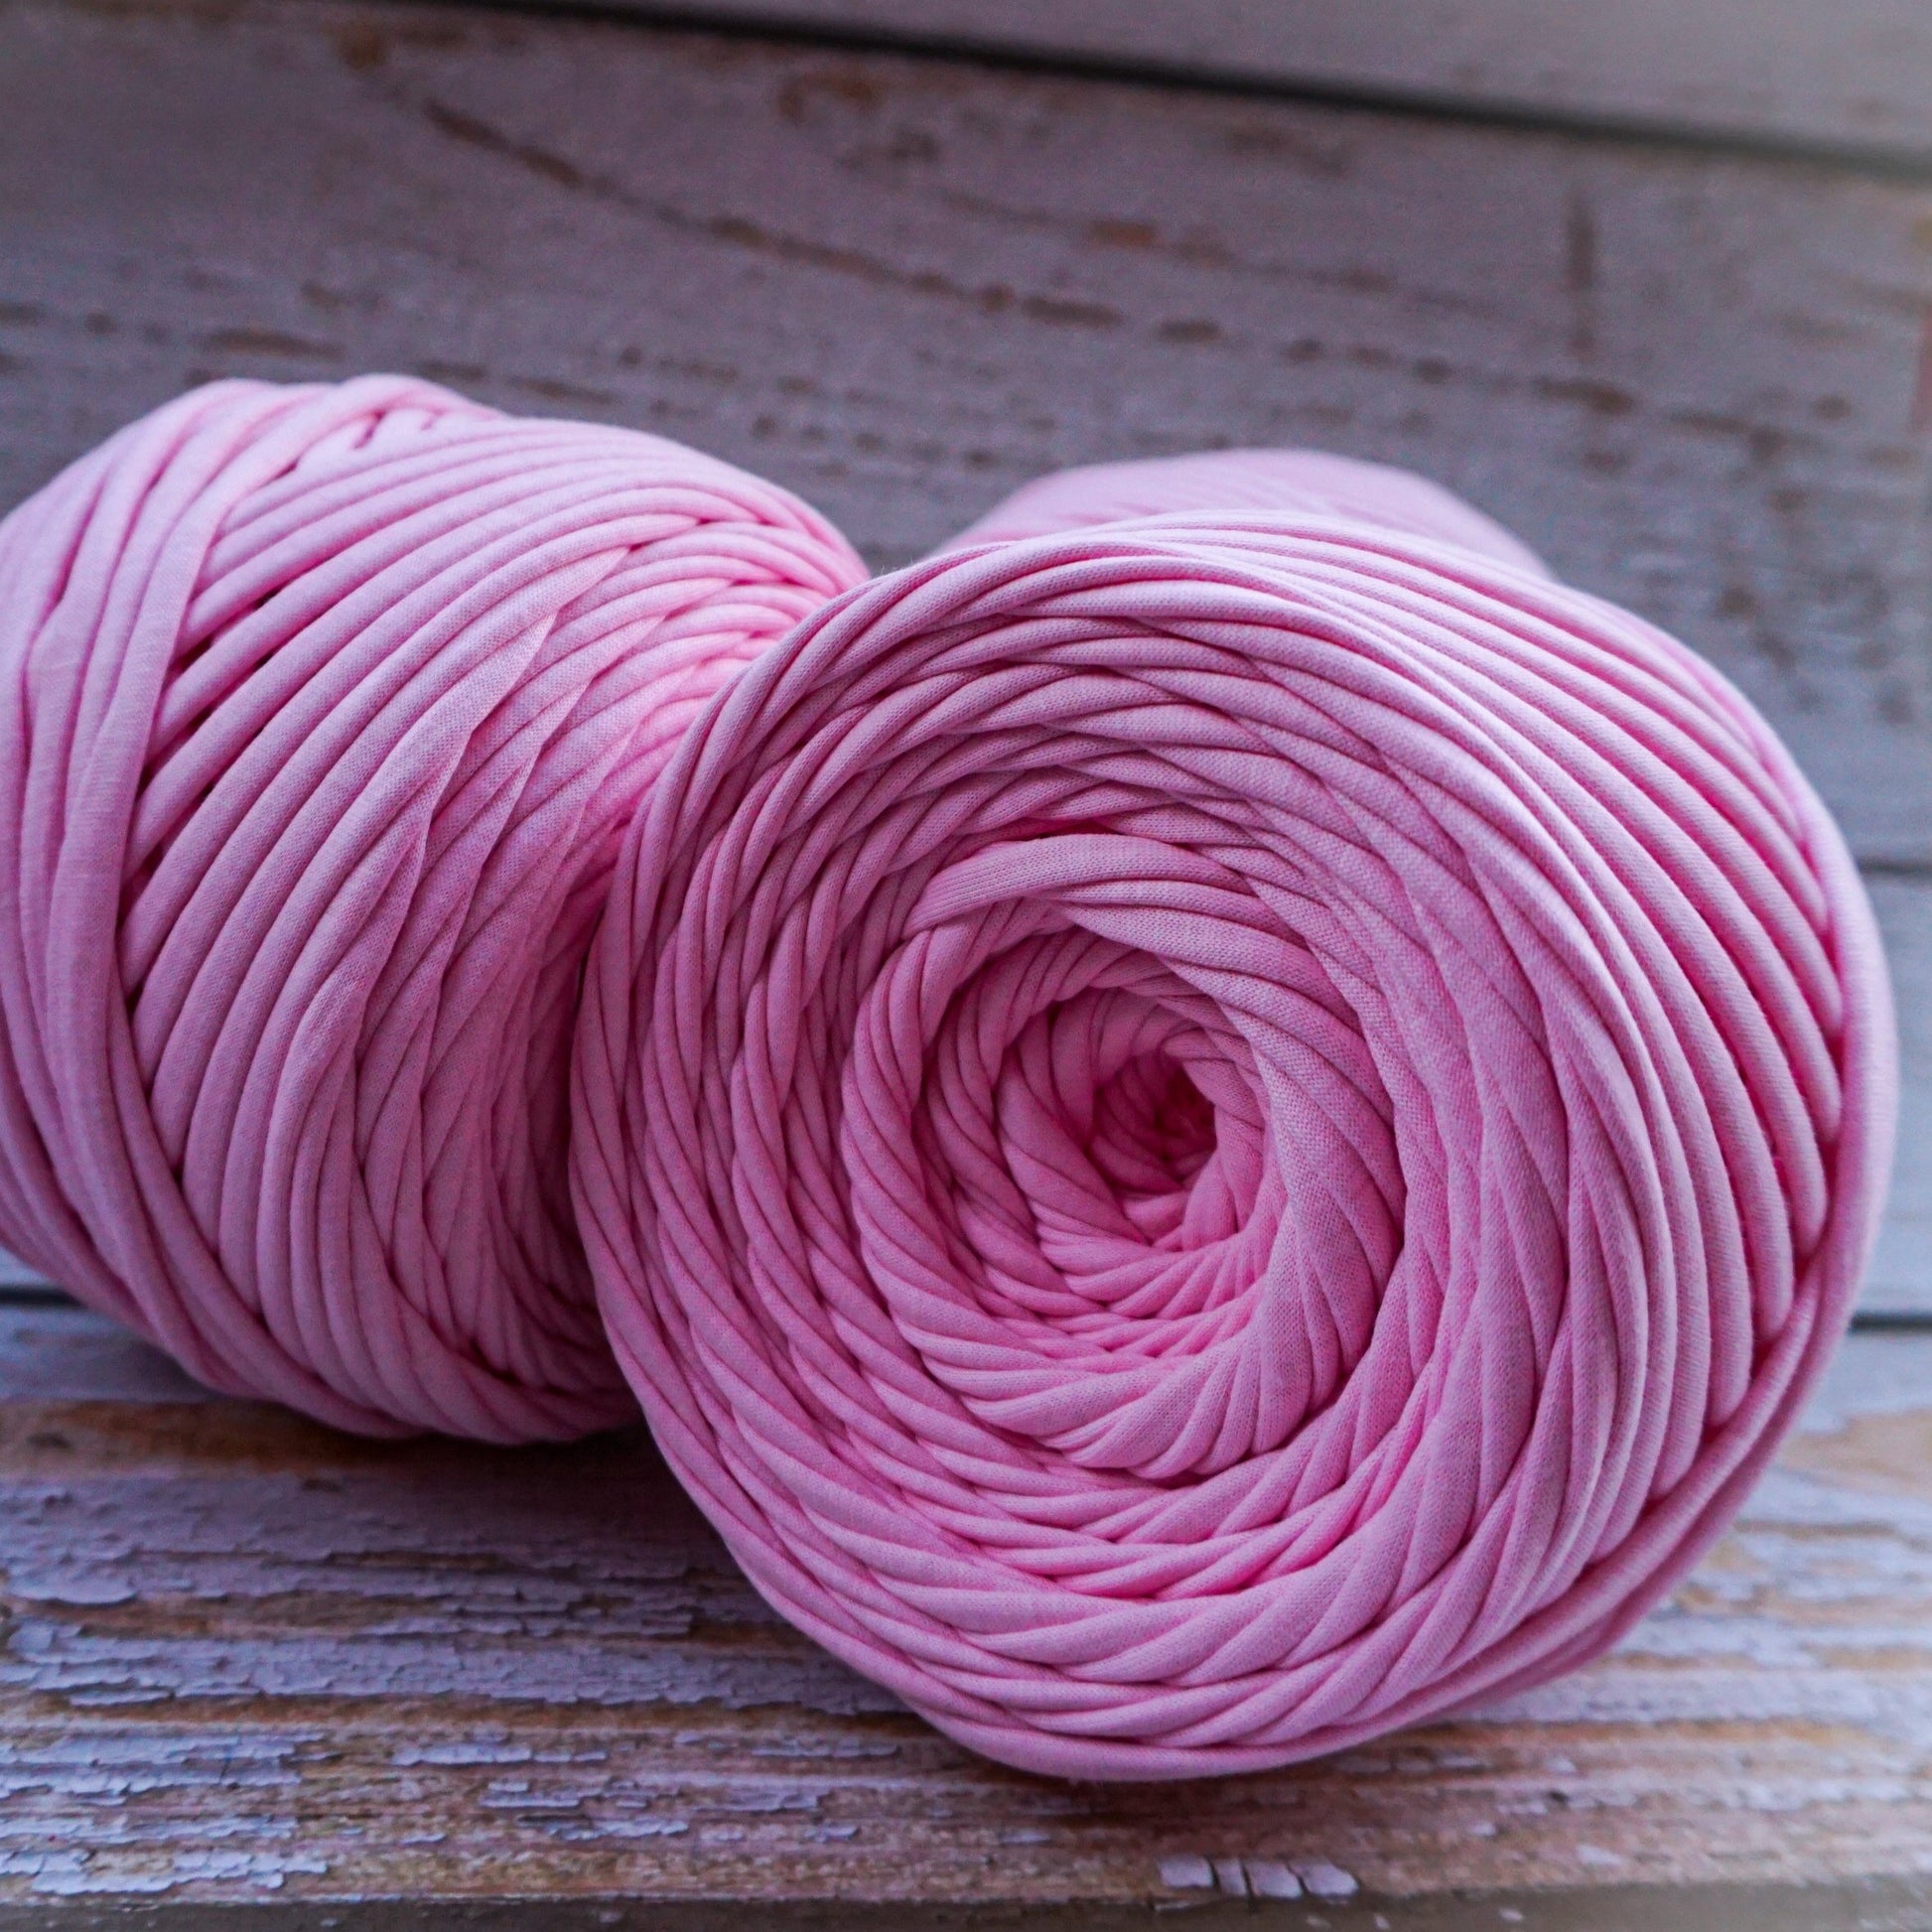 T-shirt yarn for crocheting baskets, bags, rugs and home decor. Dust r –  Knitznpurlz